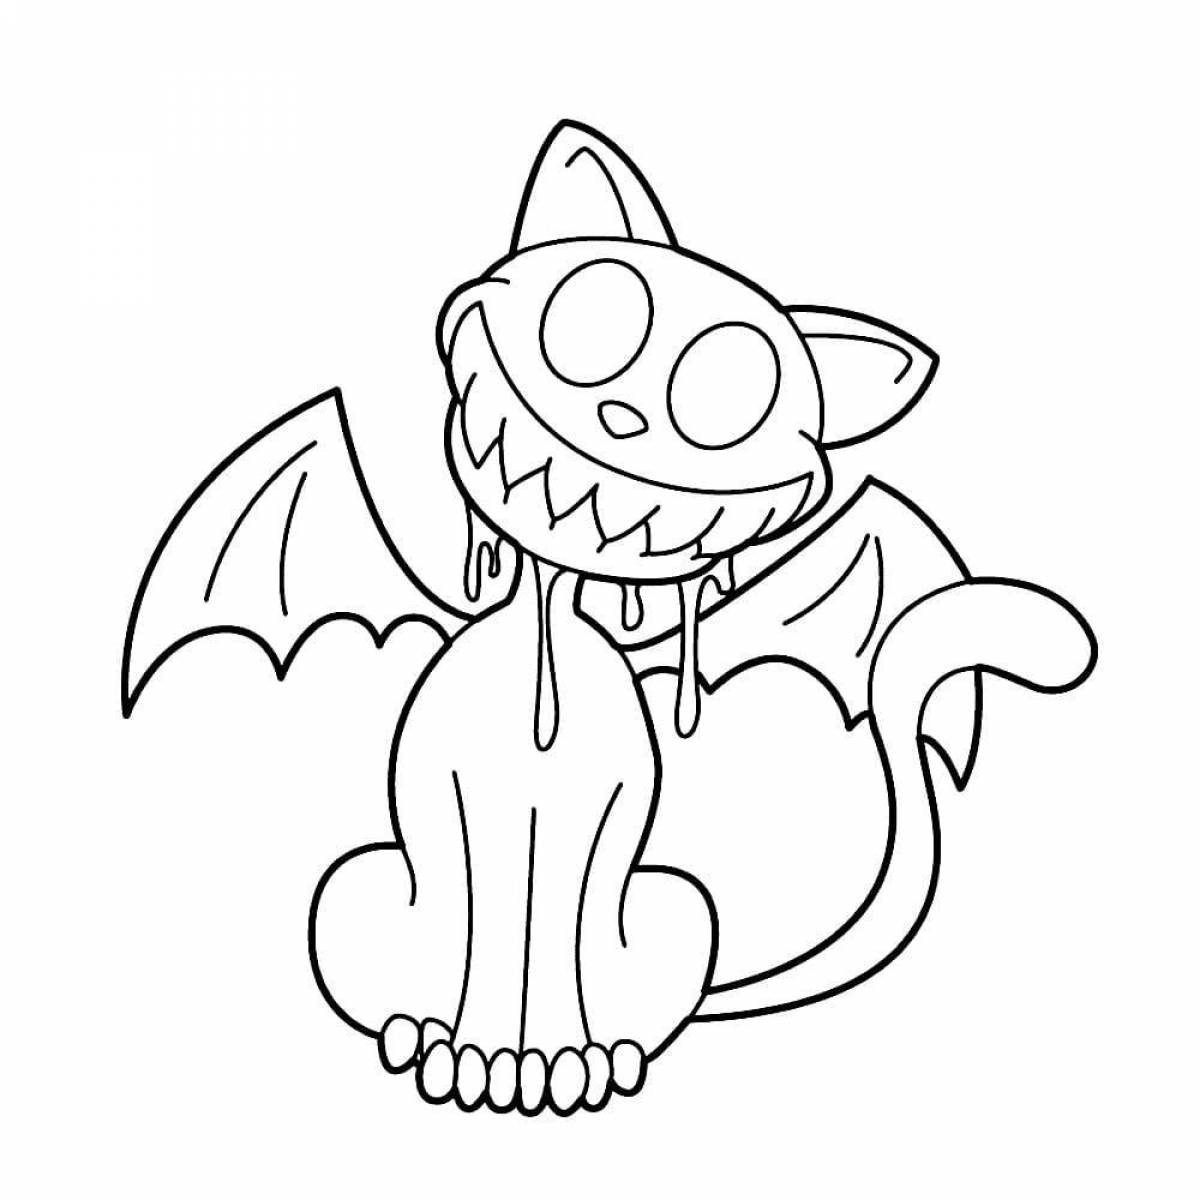 Coloring page stylish cardboard cat